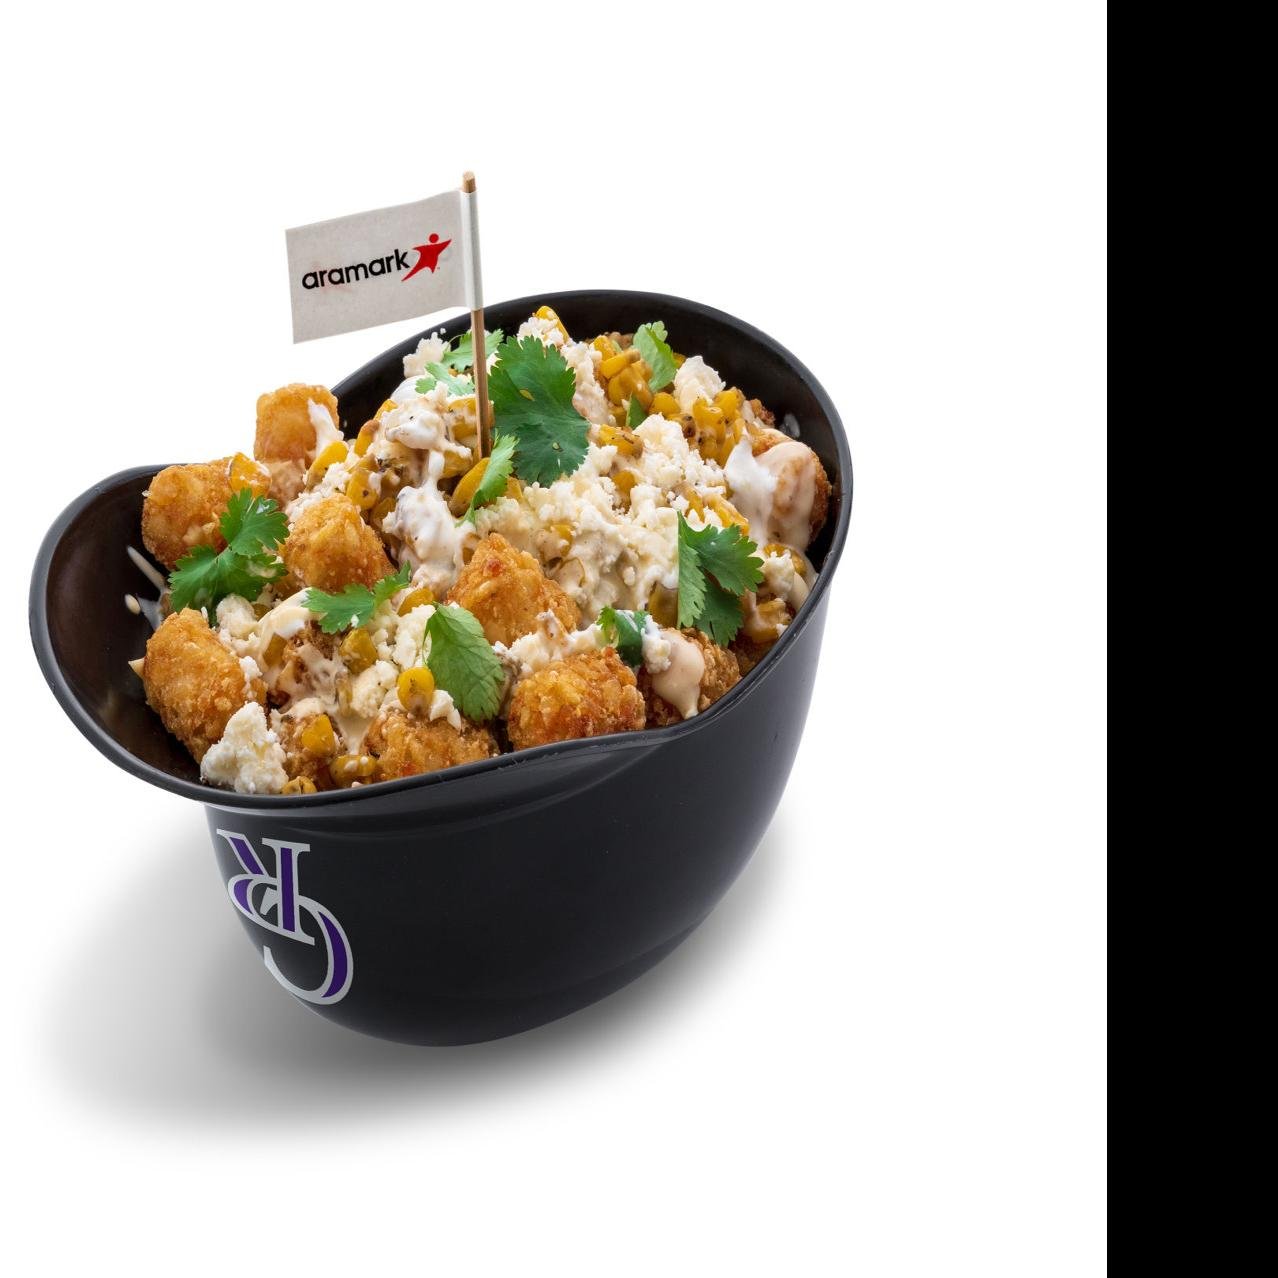 6 new foods to try at Coors Field in 2018, Sports